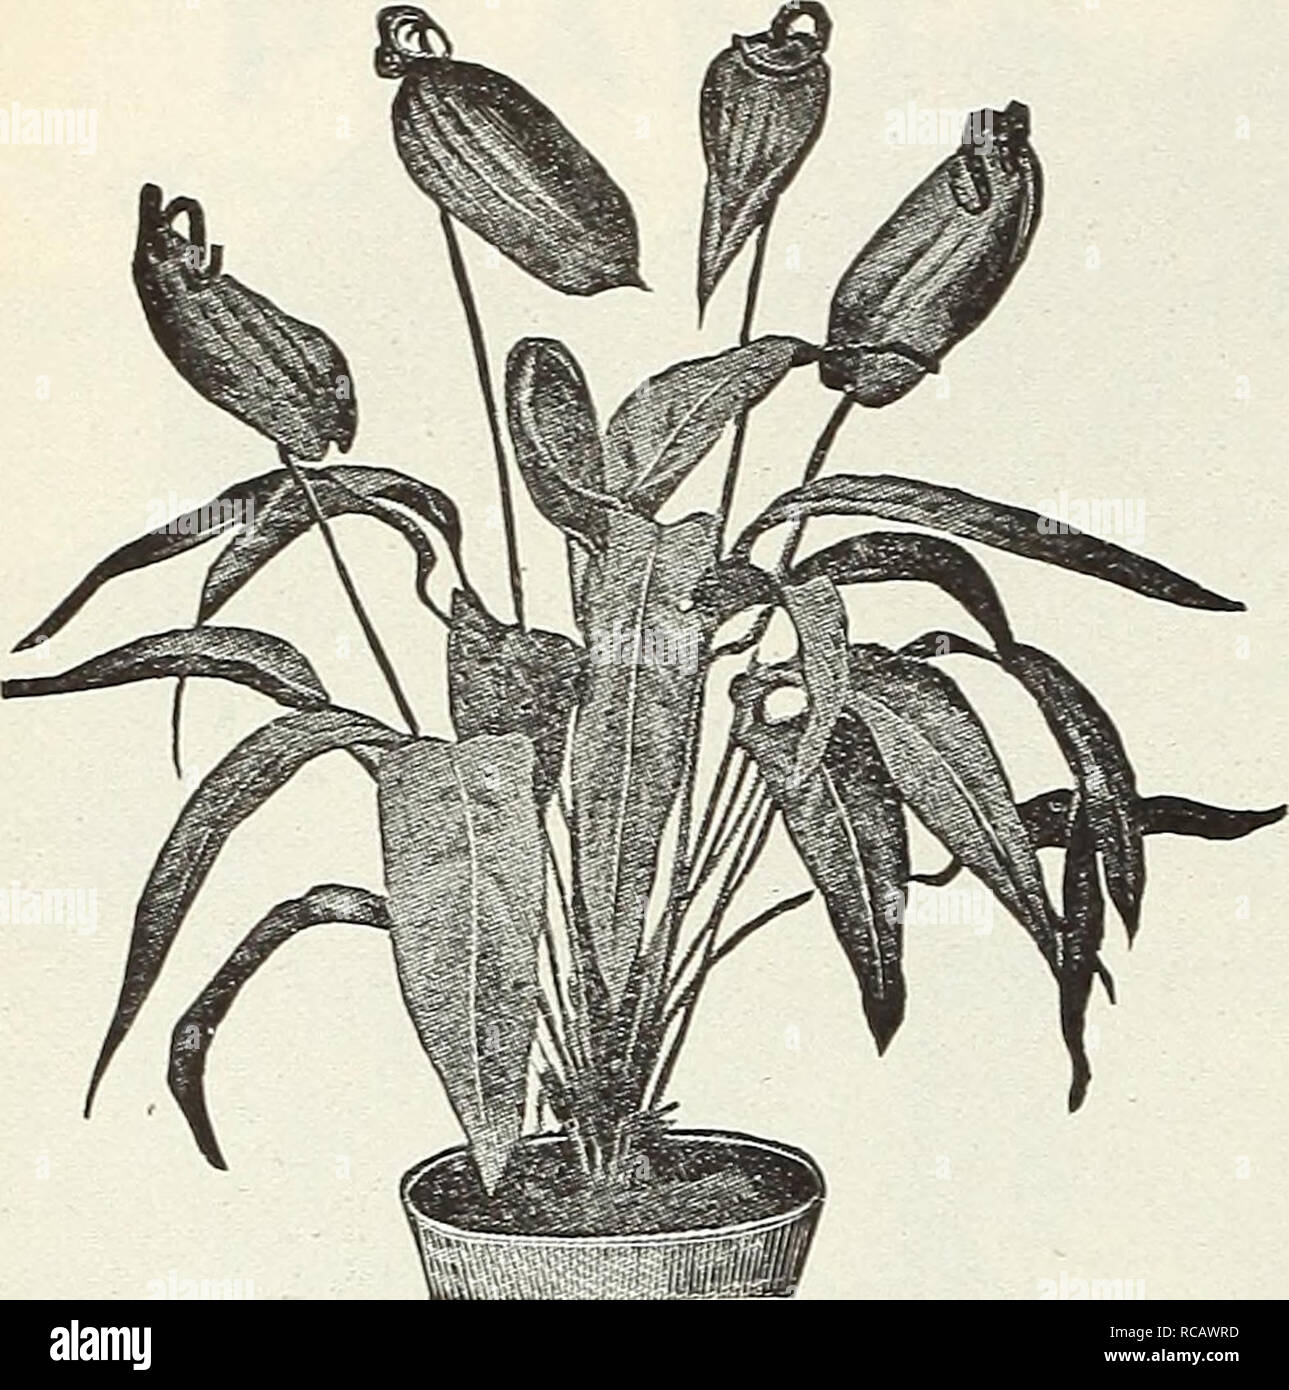 . Dreer's garden book 1916. Seeds Catalogs; Nursery stock Catalogs; Gardening Equipment and supplies Catalogs; Flowers Seeds Catalogs; Vegetables Seeds Catalogs; Fruit Seeds Catalogs. 122 n n I -HEMRYA DRIER -PHILADELPHIA 4&gt;A-B^f GARDEM^OREEMHOUSE PLATO i. Anthurium ANTHERICCTI. Comosum (Mandaianum). A pretty variegated plant well adapted for use in hanging baskets, or as an edging for porch or window boxes, with graceful, 4 to 6 inch long, deep green foliage with a band of creamy yellow through the centre. 25 cts. each; $2.50 per doz. ANTHURIUM (Flamingo Flower). Pretty greenhouse plants t Stock Photo